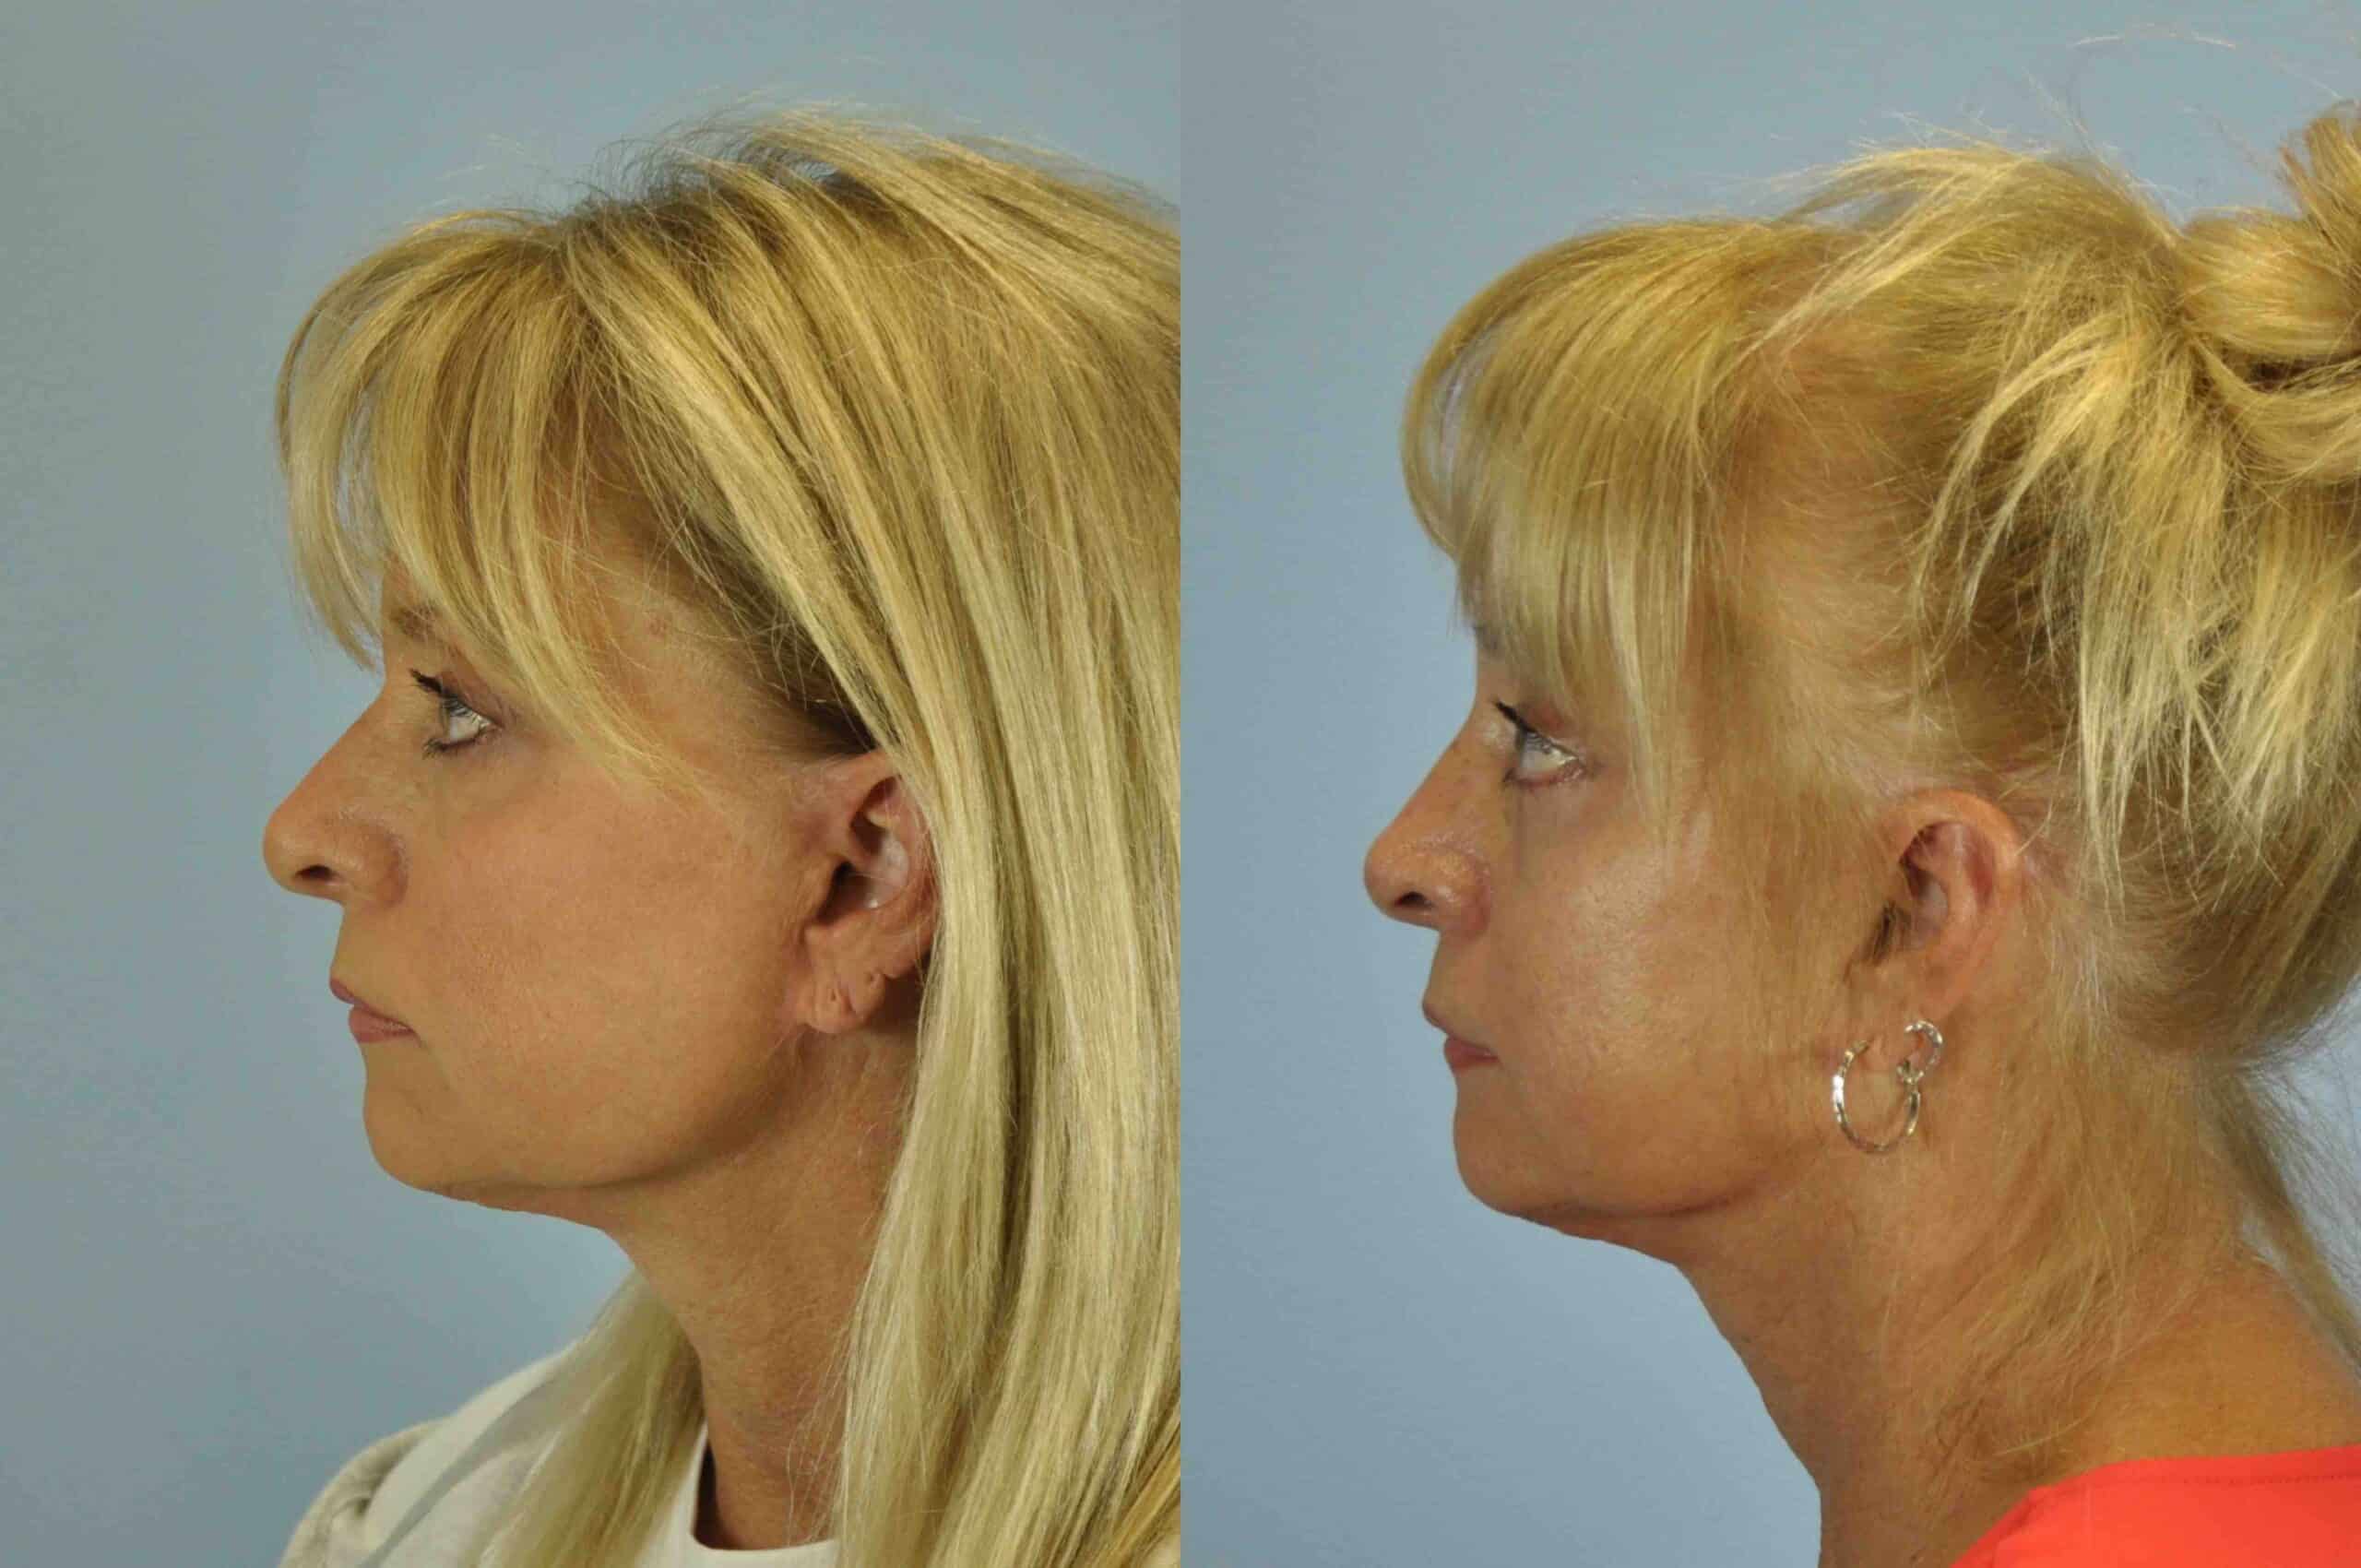 Before and after, 2 mo post op from Lower Blepharoplasty, Canthopexy, Brow Lift performed by Dr. Paul Vanek (side view)